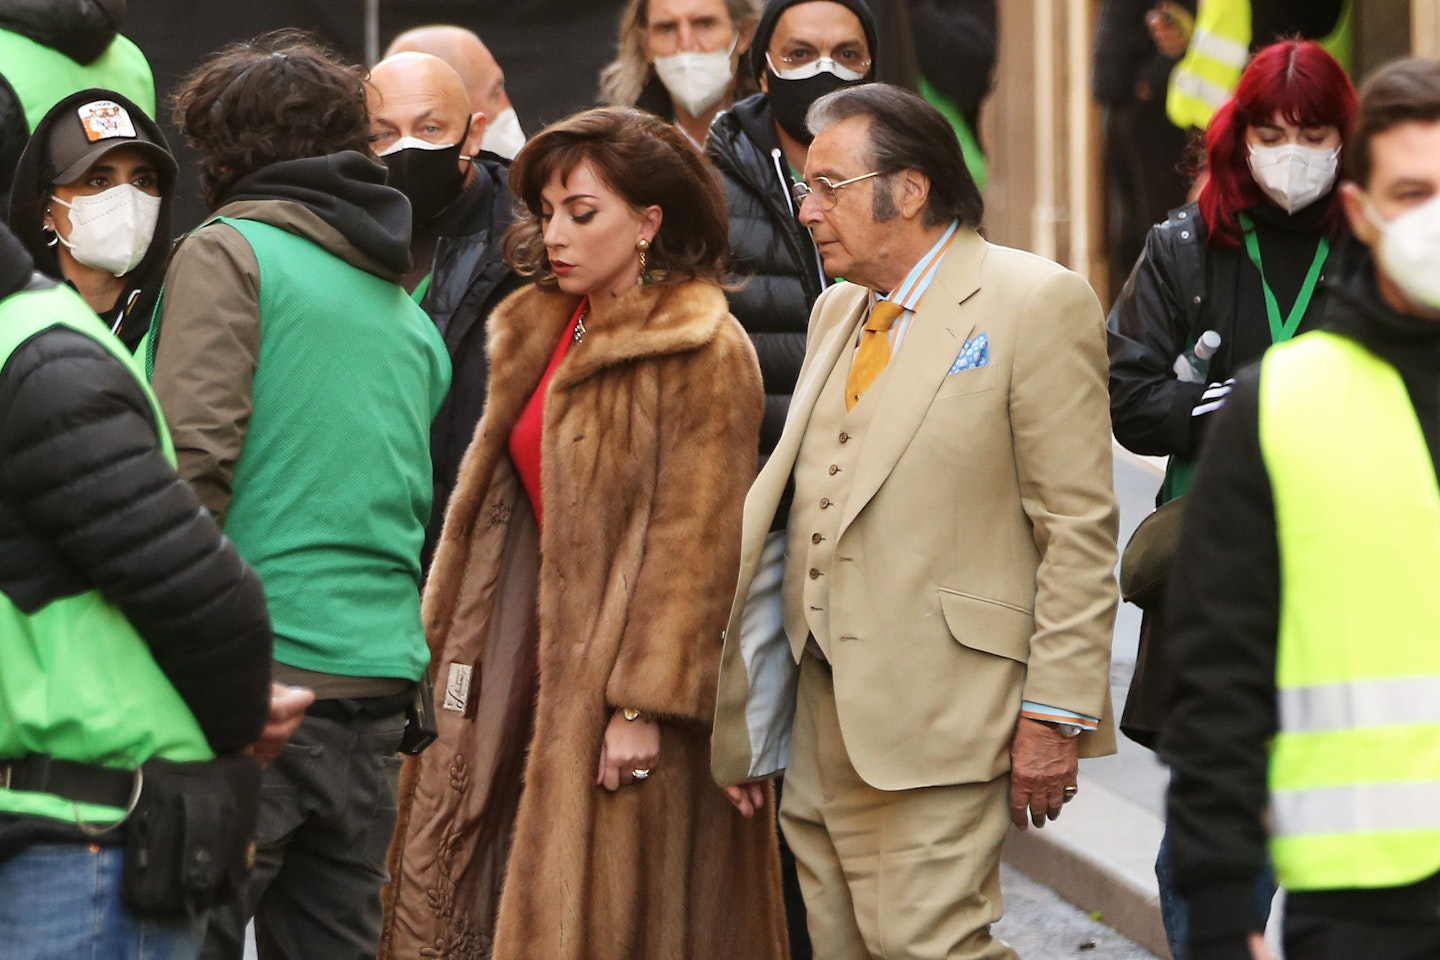 Lady Gaga and Al Pacino on set of house of gucci